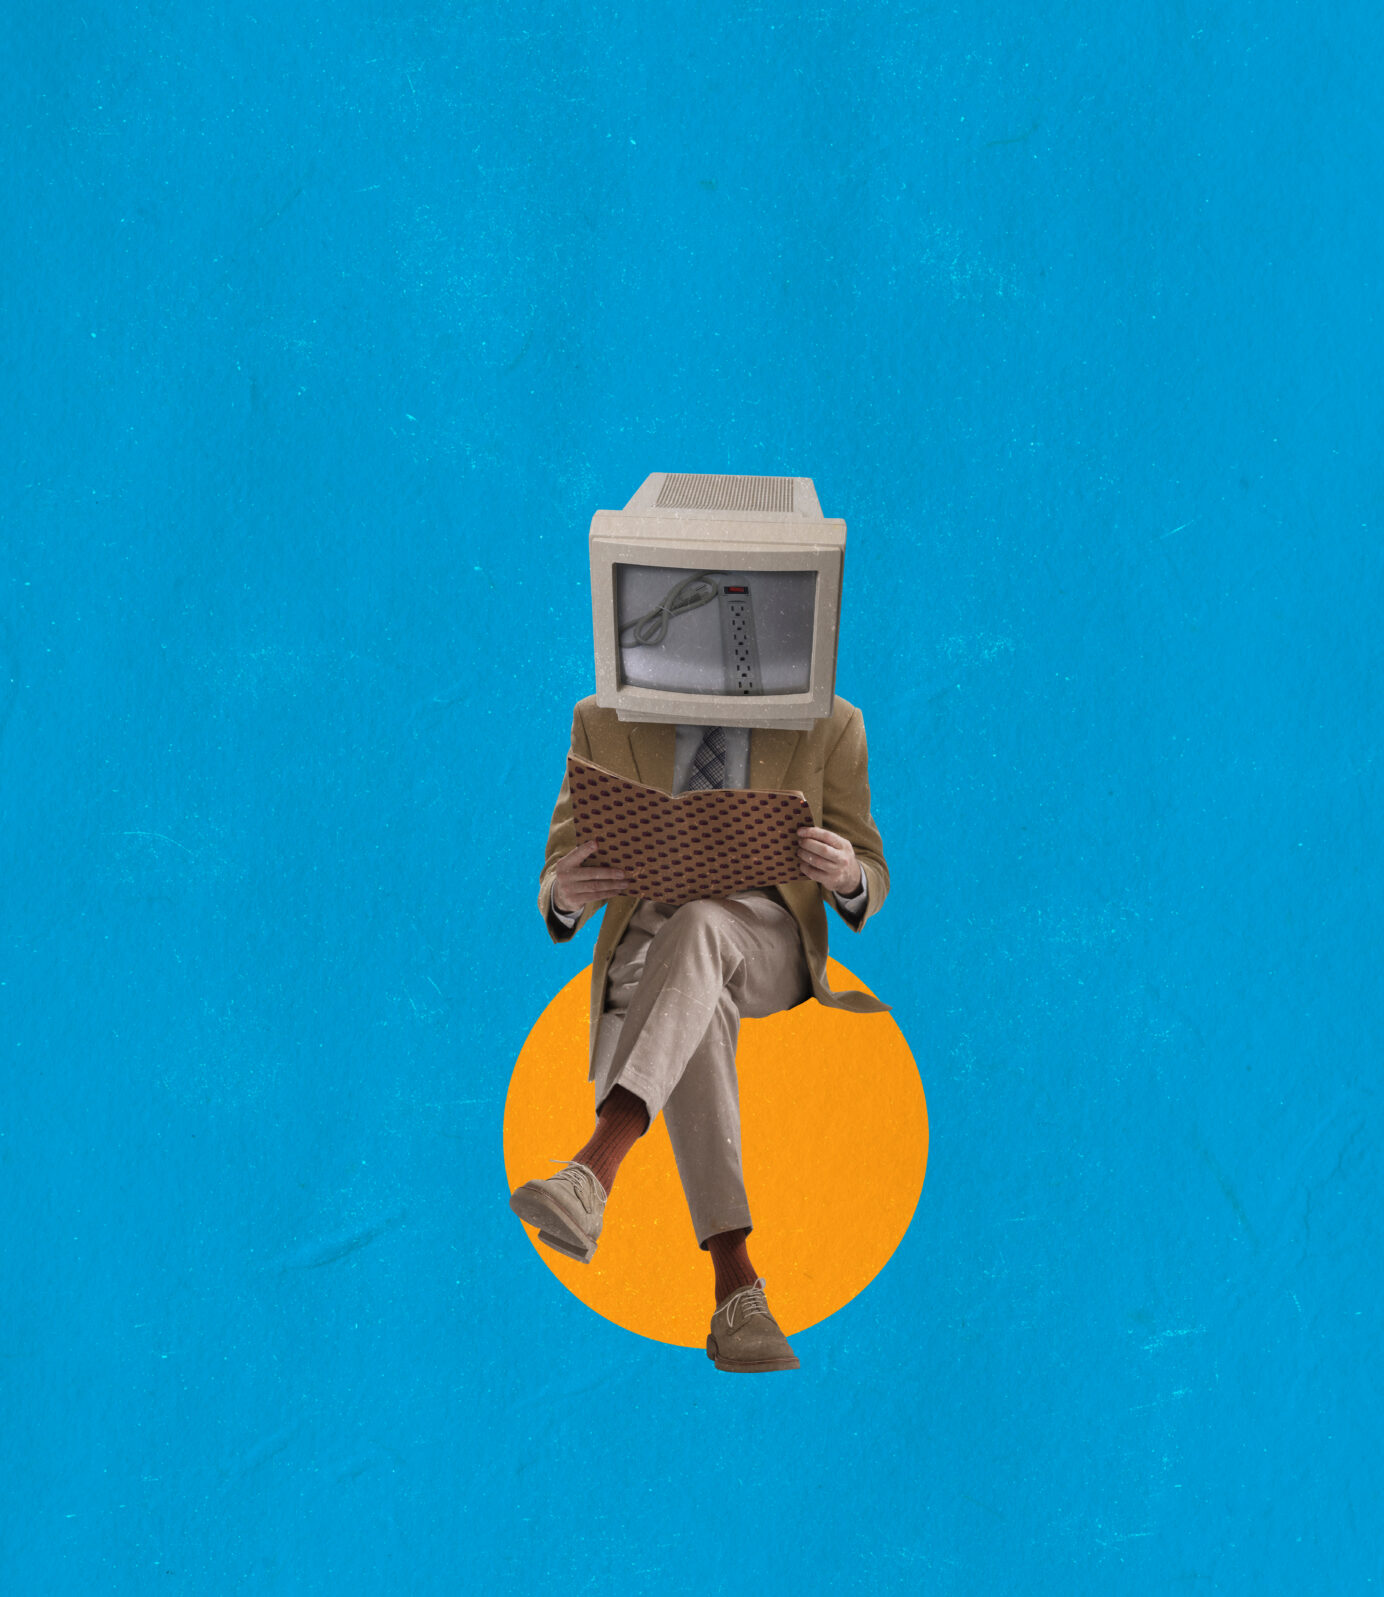 Retro style design. Contemporary art collage of man with vintage computer head reading isolated over blue background